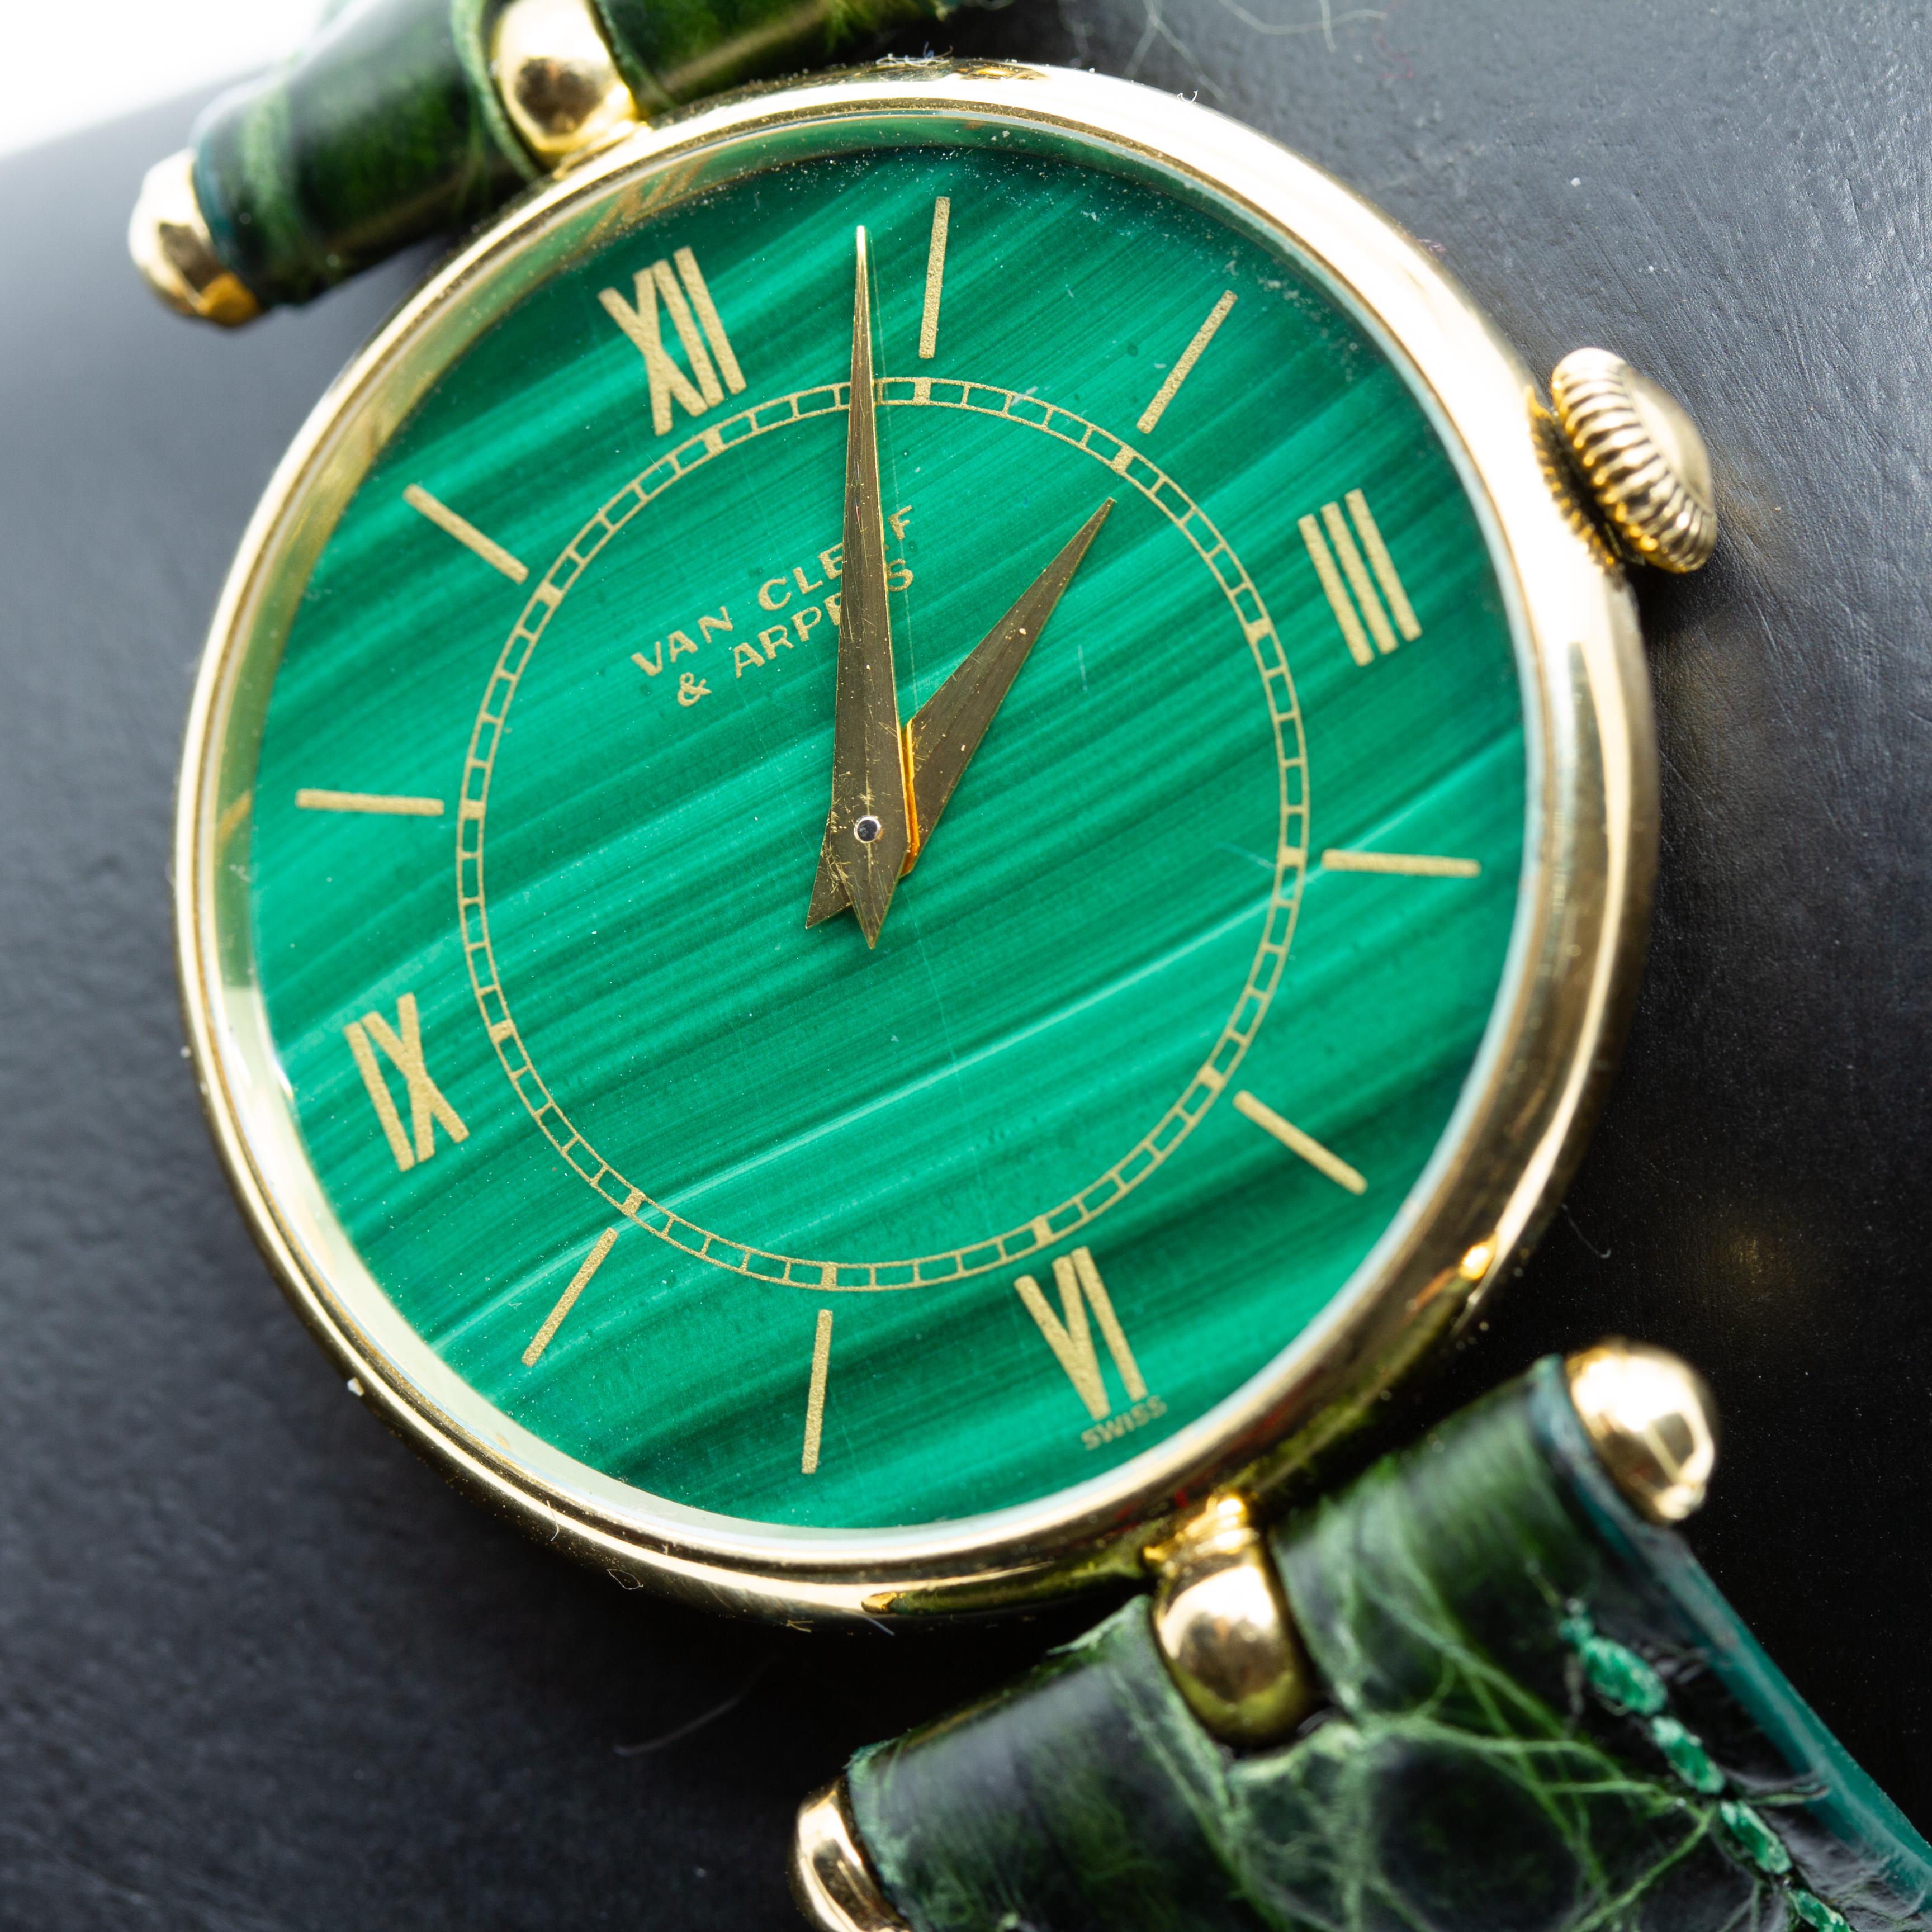 Van Cleef & Arpels 18K Yellow Gold Wristwatch With Malachite Dial. Offered is a authentic 18K gold Van Cleef and Arpels 17 jewel stem wind wristwatch. The watch has a Genuine Crocodile Band 16R Made in USA. The watch is signed on the face and on the